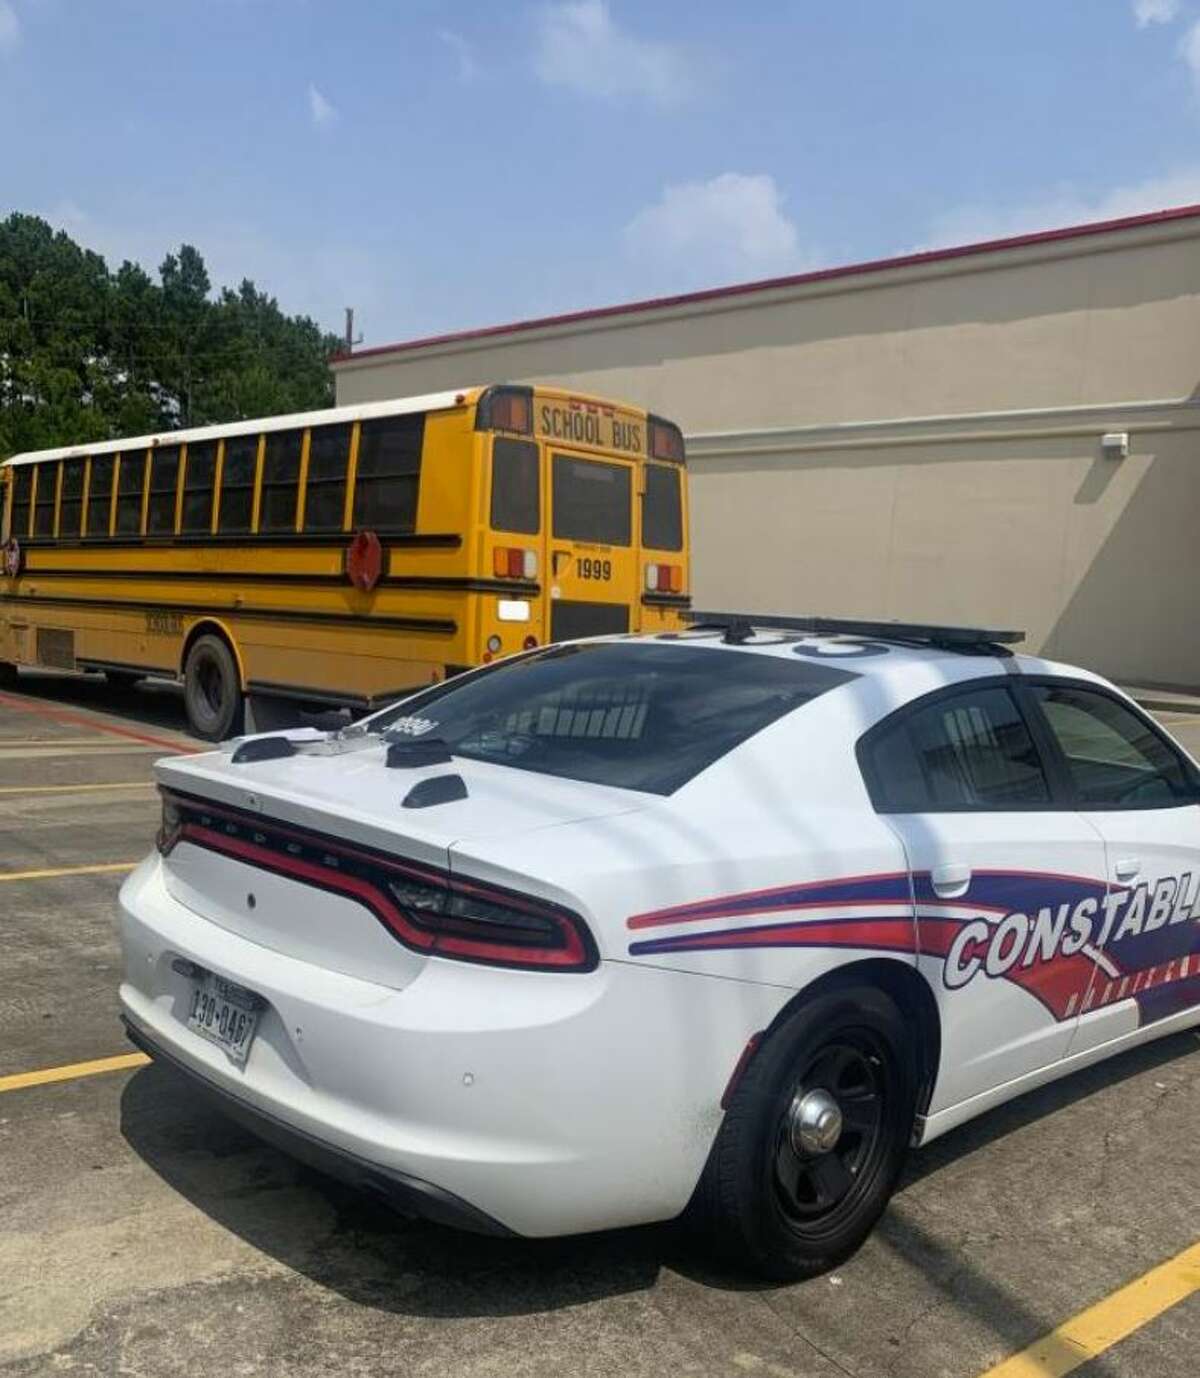 Tweeted photo of the school bus provided by Harris County Pct. 4.